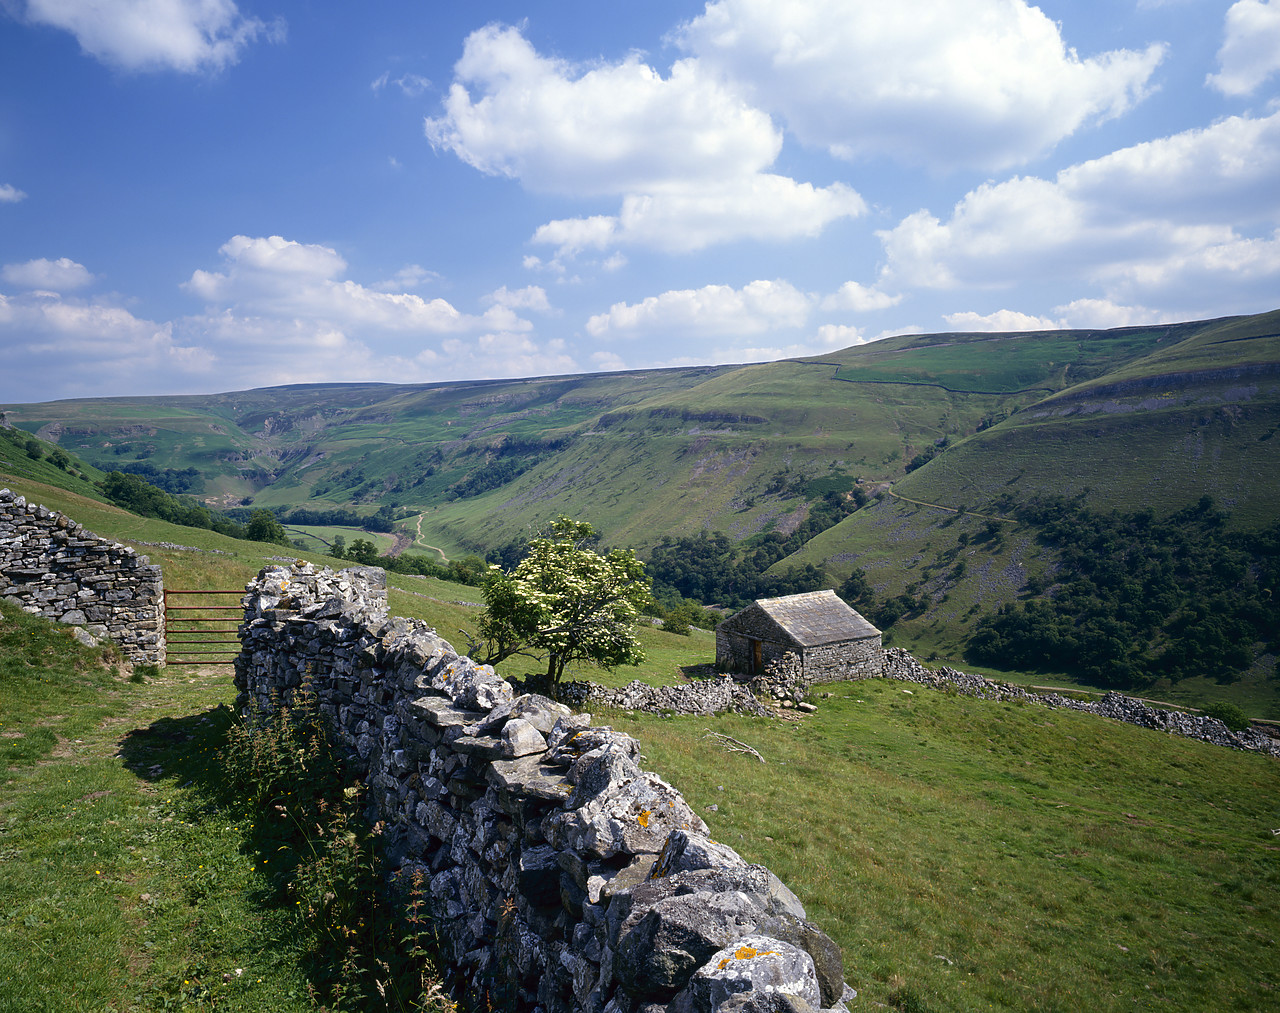 #944627-1 - Countryside above Muker, Swaledale, North Yorkshire, England